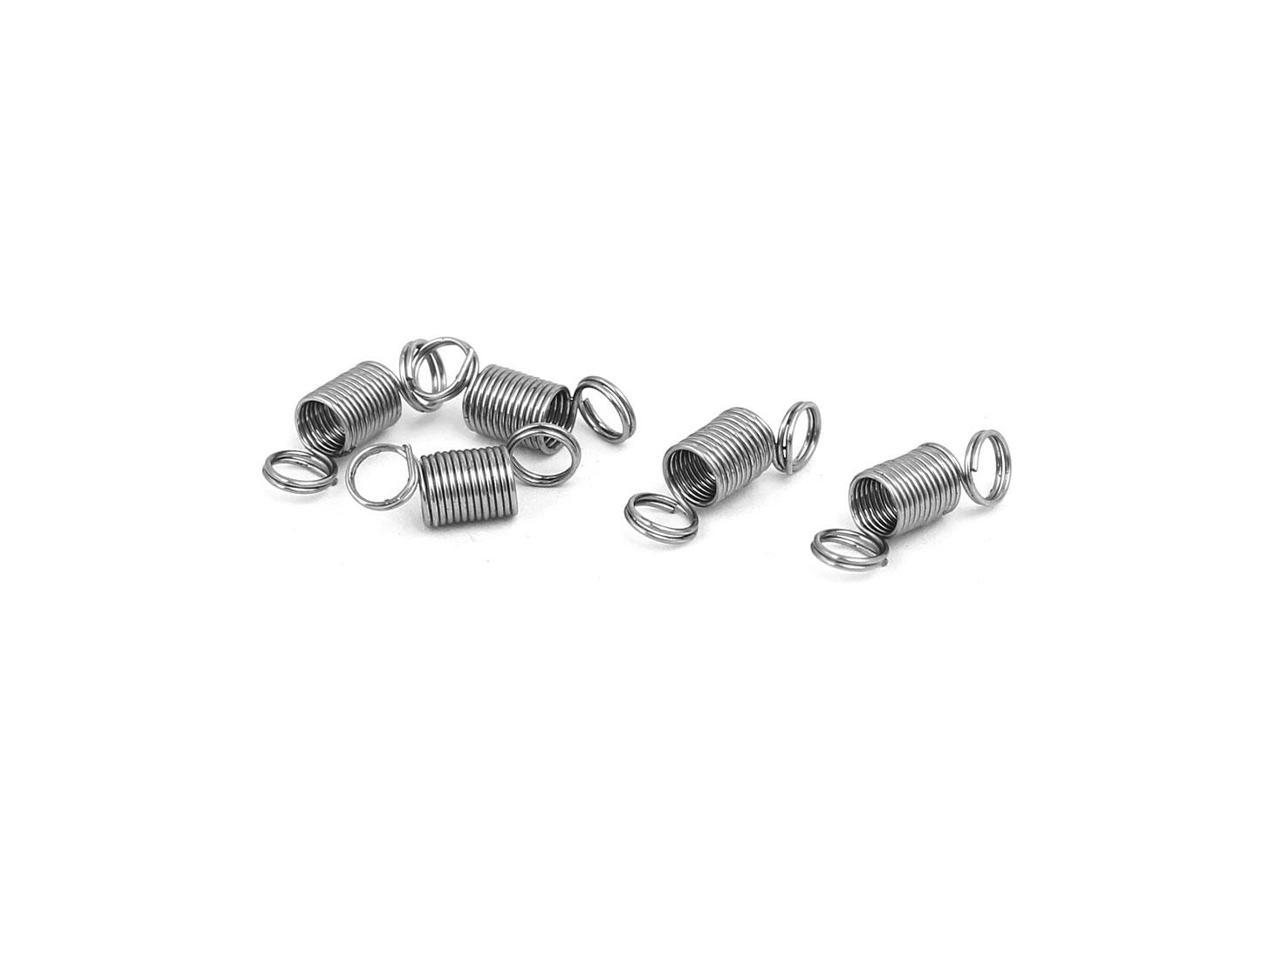 0.6mmx6mmx25mm 304 Stainless Steel Compression Springs Silver Tone 10pcs 